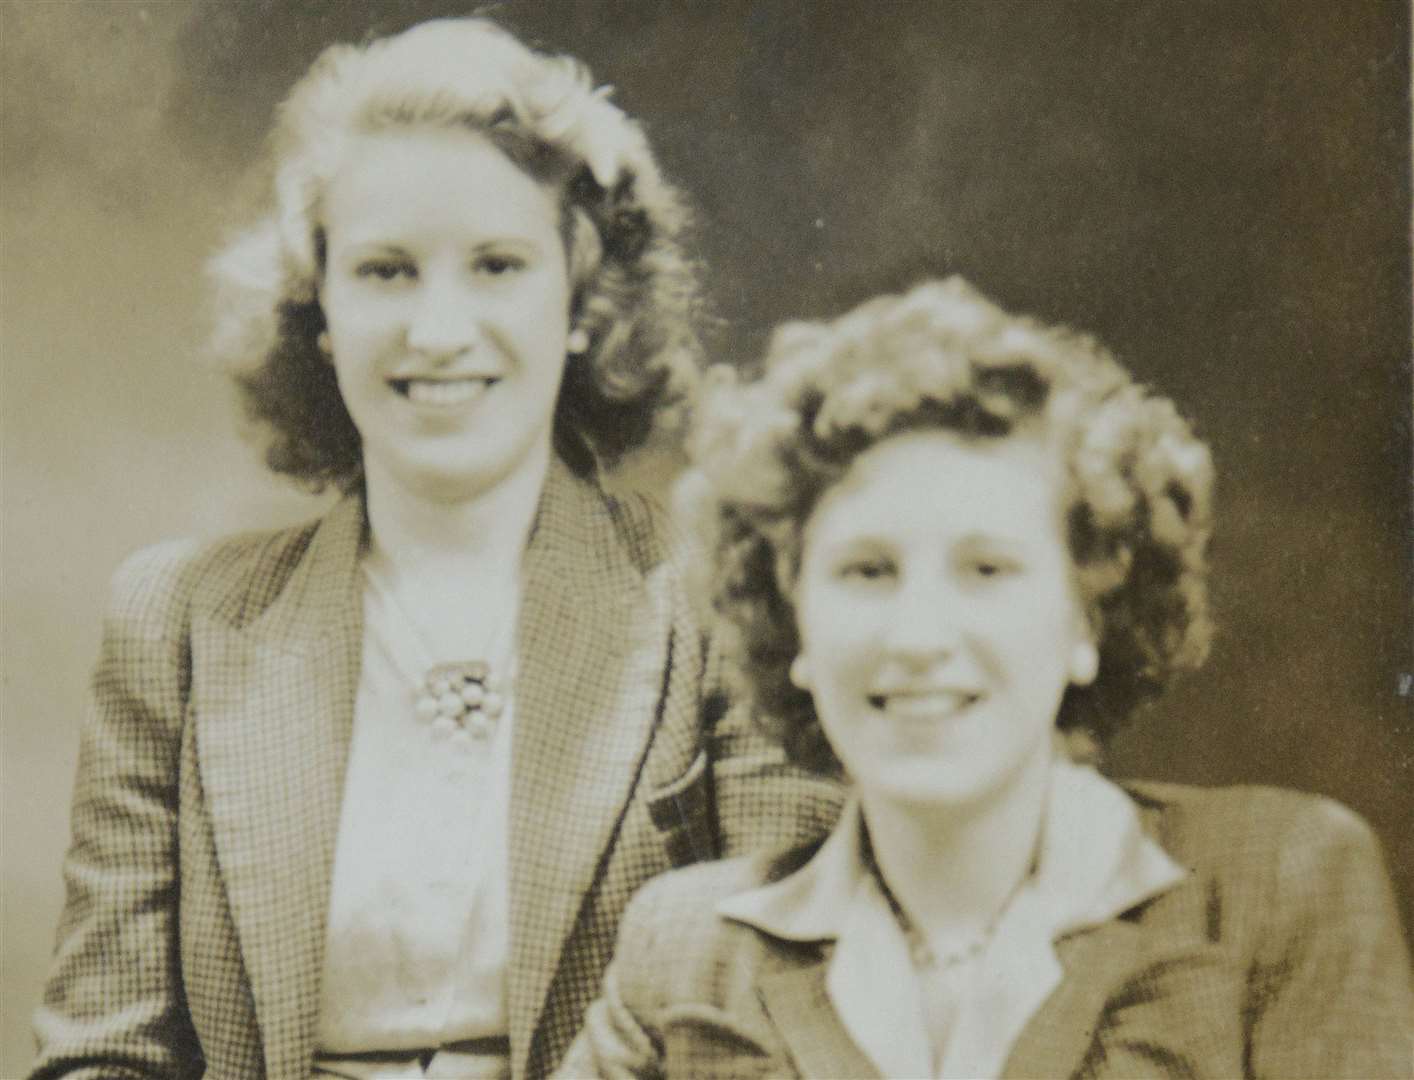 Jackie and Jill pictured together as young women